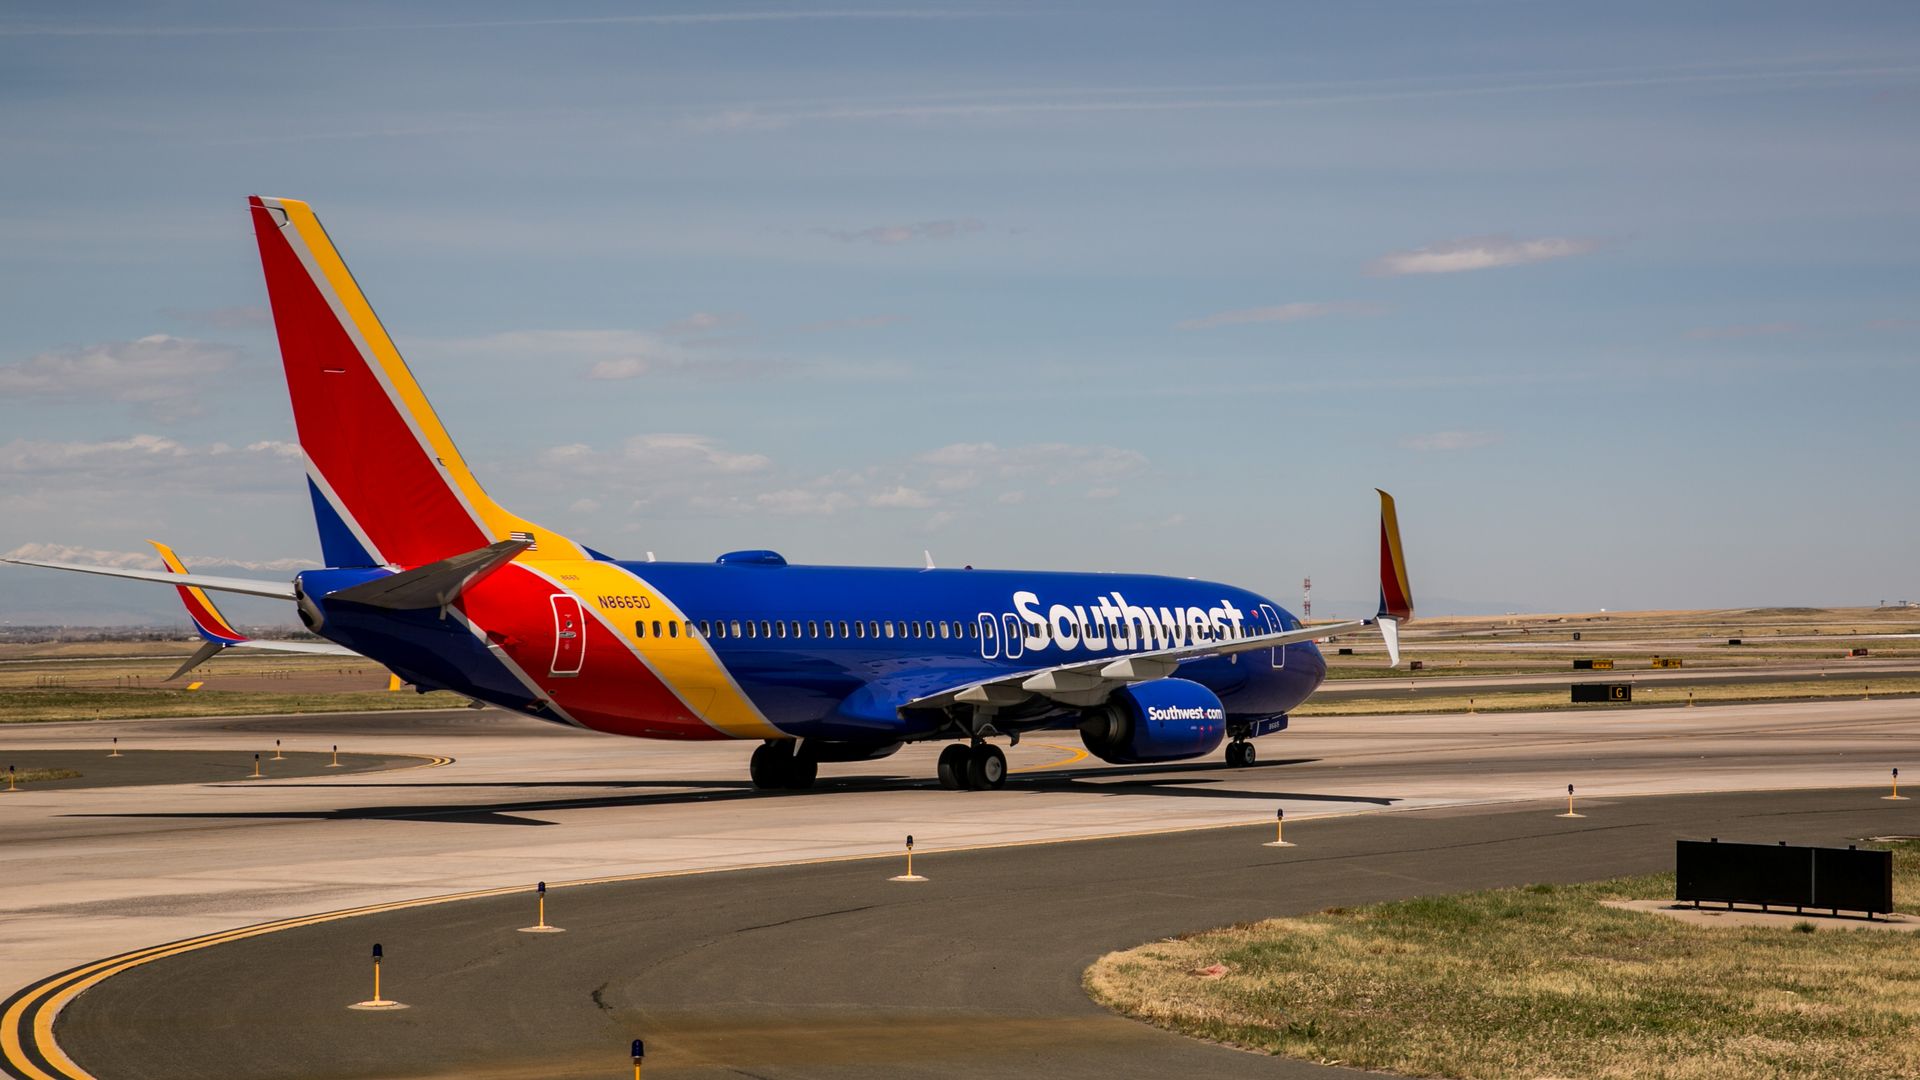 Picture of a Southwest Airline plane